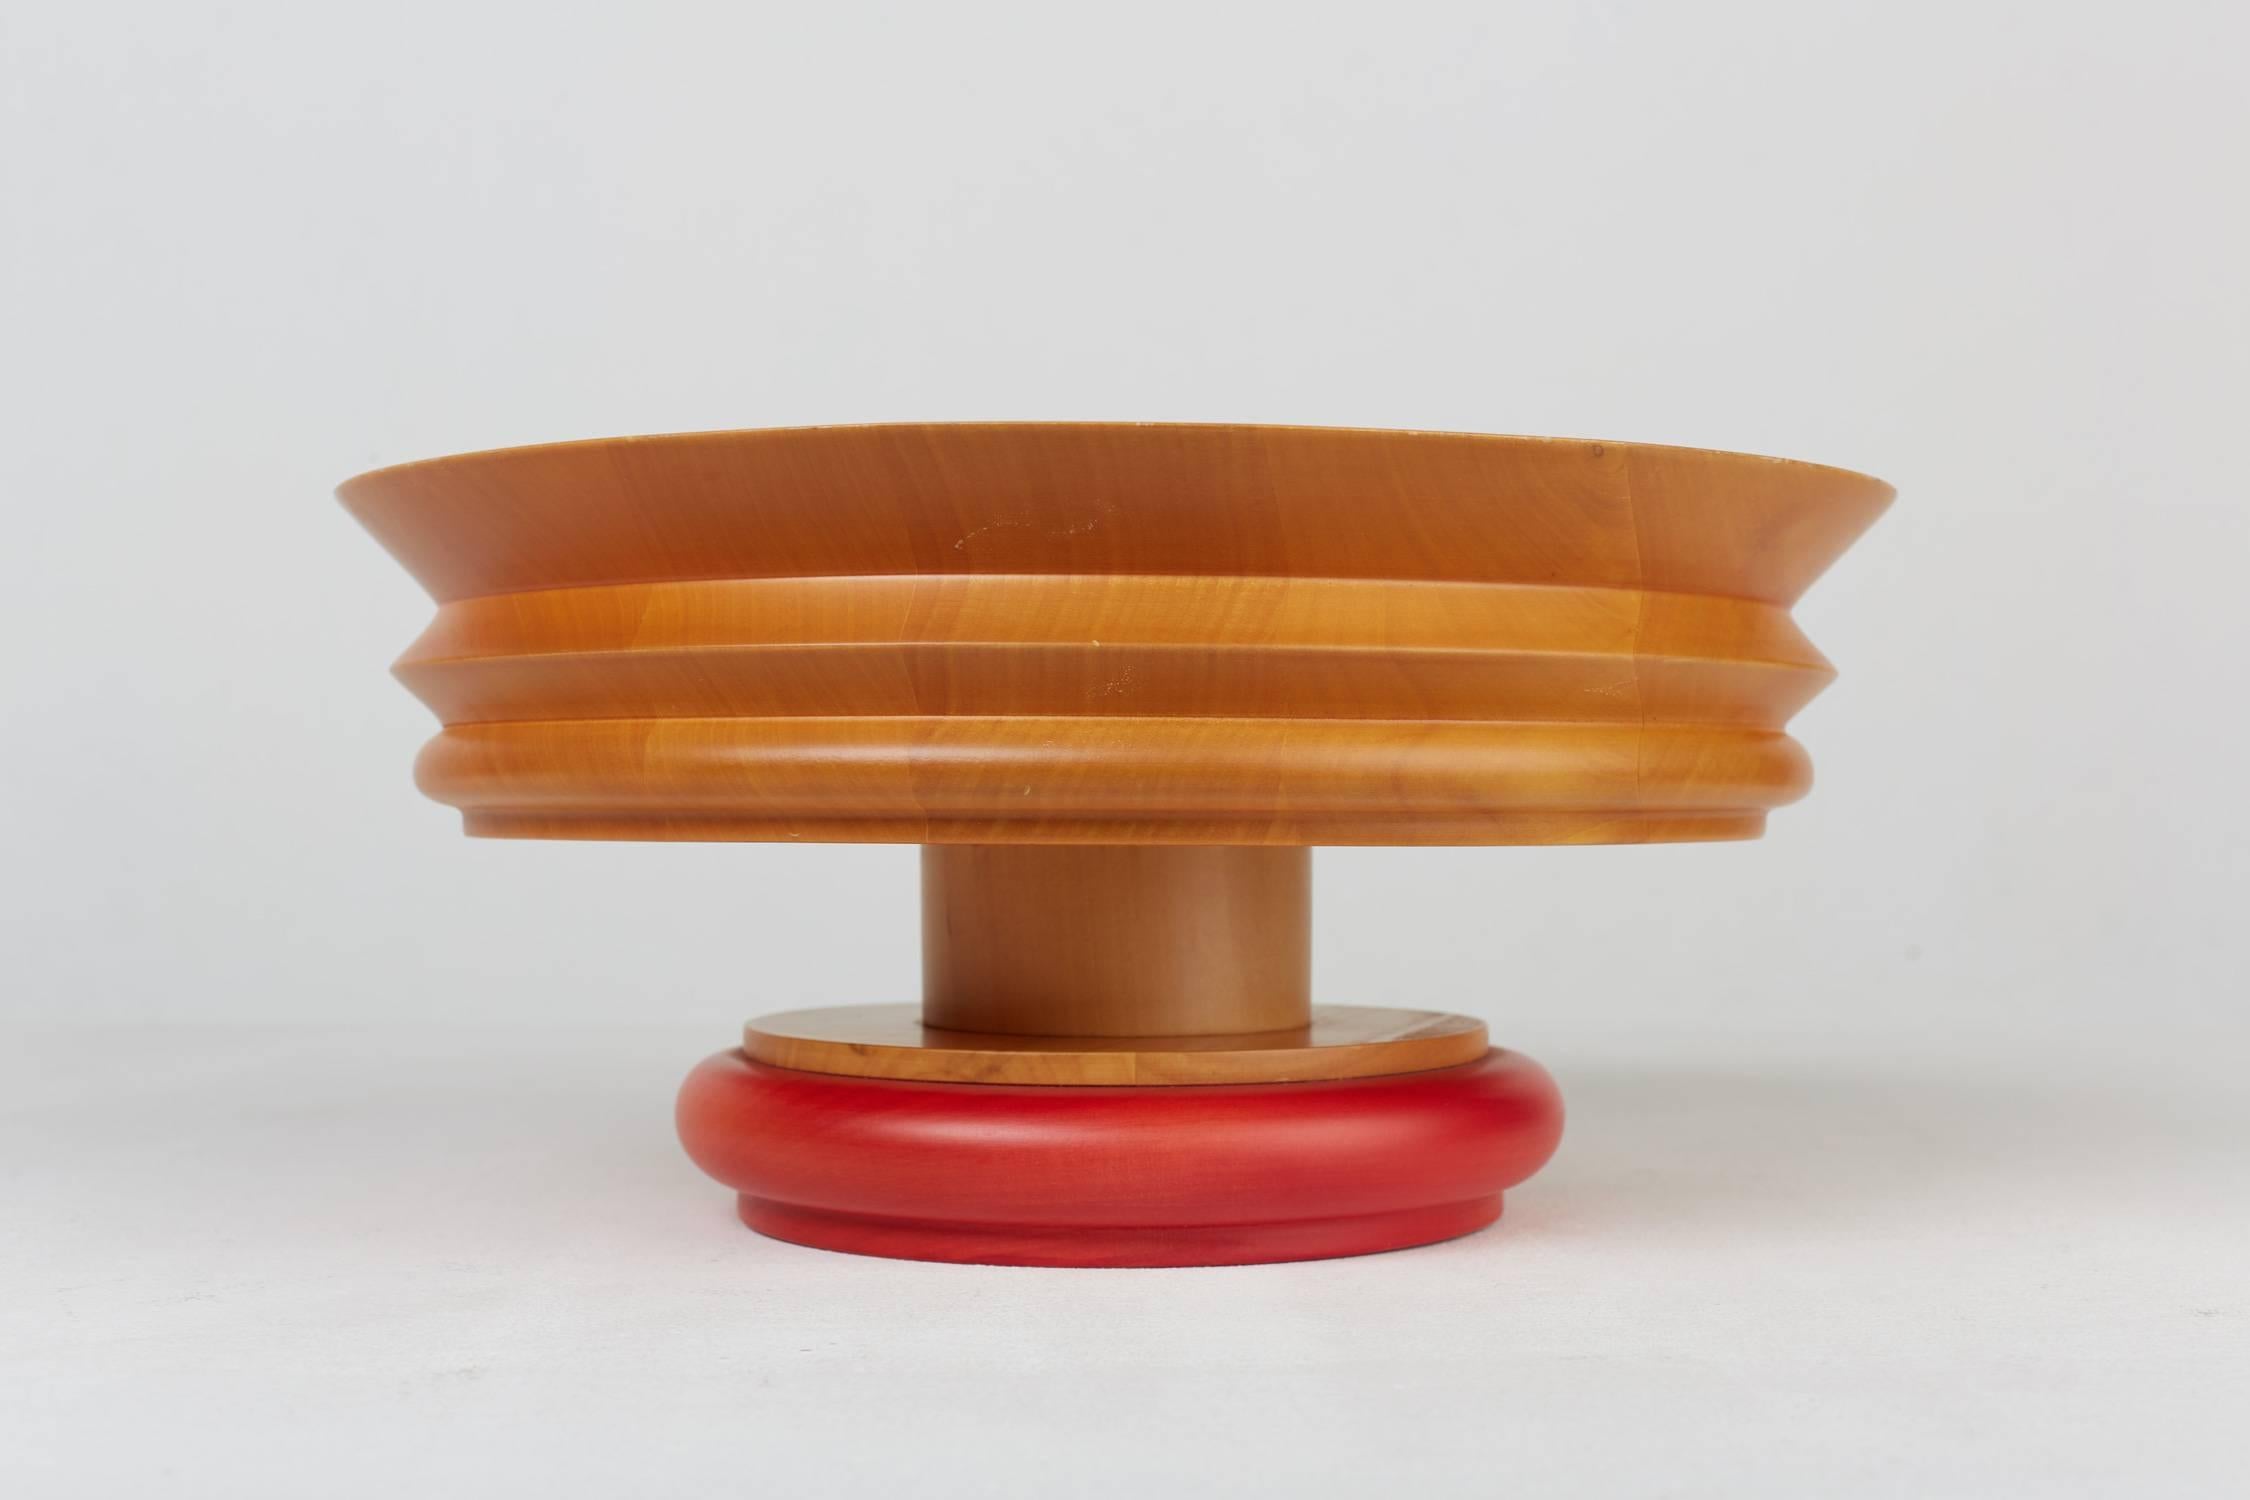 Wooden bowl.
Design by Ettore Sottsass (1994).
Manufactured by Alessi, Italy.
Measures: D 30 cm, H 14 cm.
Turned limewood, foot varnished in red.
Out of production.